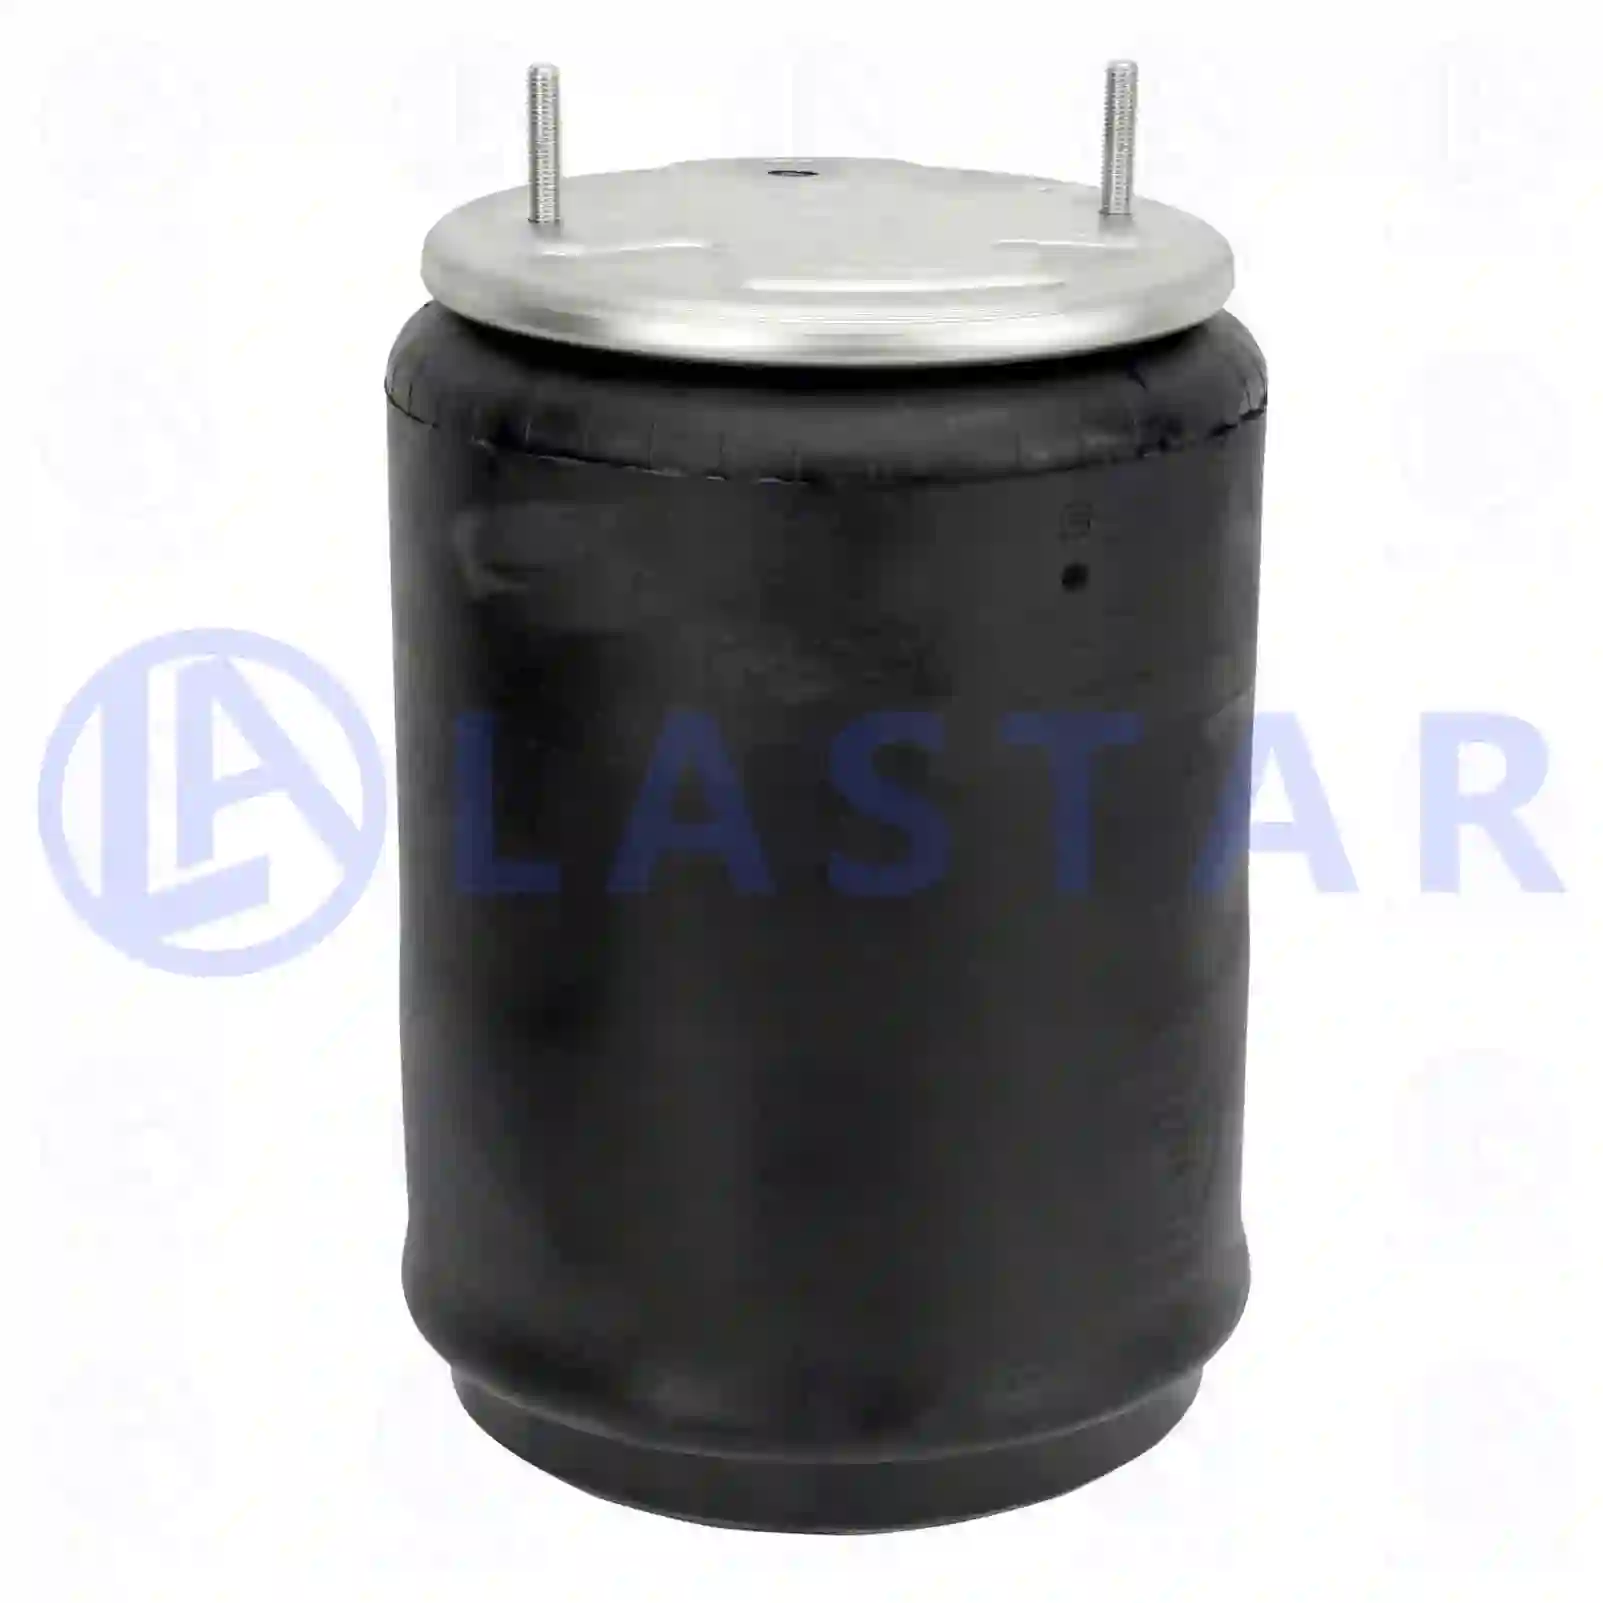 Air spring, with steel piston, 77728700, 20452136, 20452142, 20479800, 20554760, 20580705, 21961472 ||  77728700 Lastar Spare Part | Truck Spare Parts, Auotomotive Spare Parts Air spring, with steel piston, 77728700, 20452136, 20452142, 20479800, 20554760, 20580705, 21961472 ||  77728700 Lastar Spare Part | Truck Spare Parts, Auotomotive Spare Parts